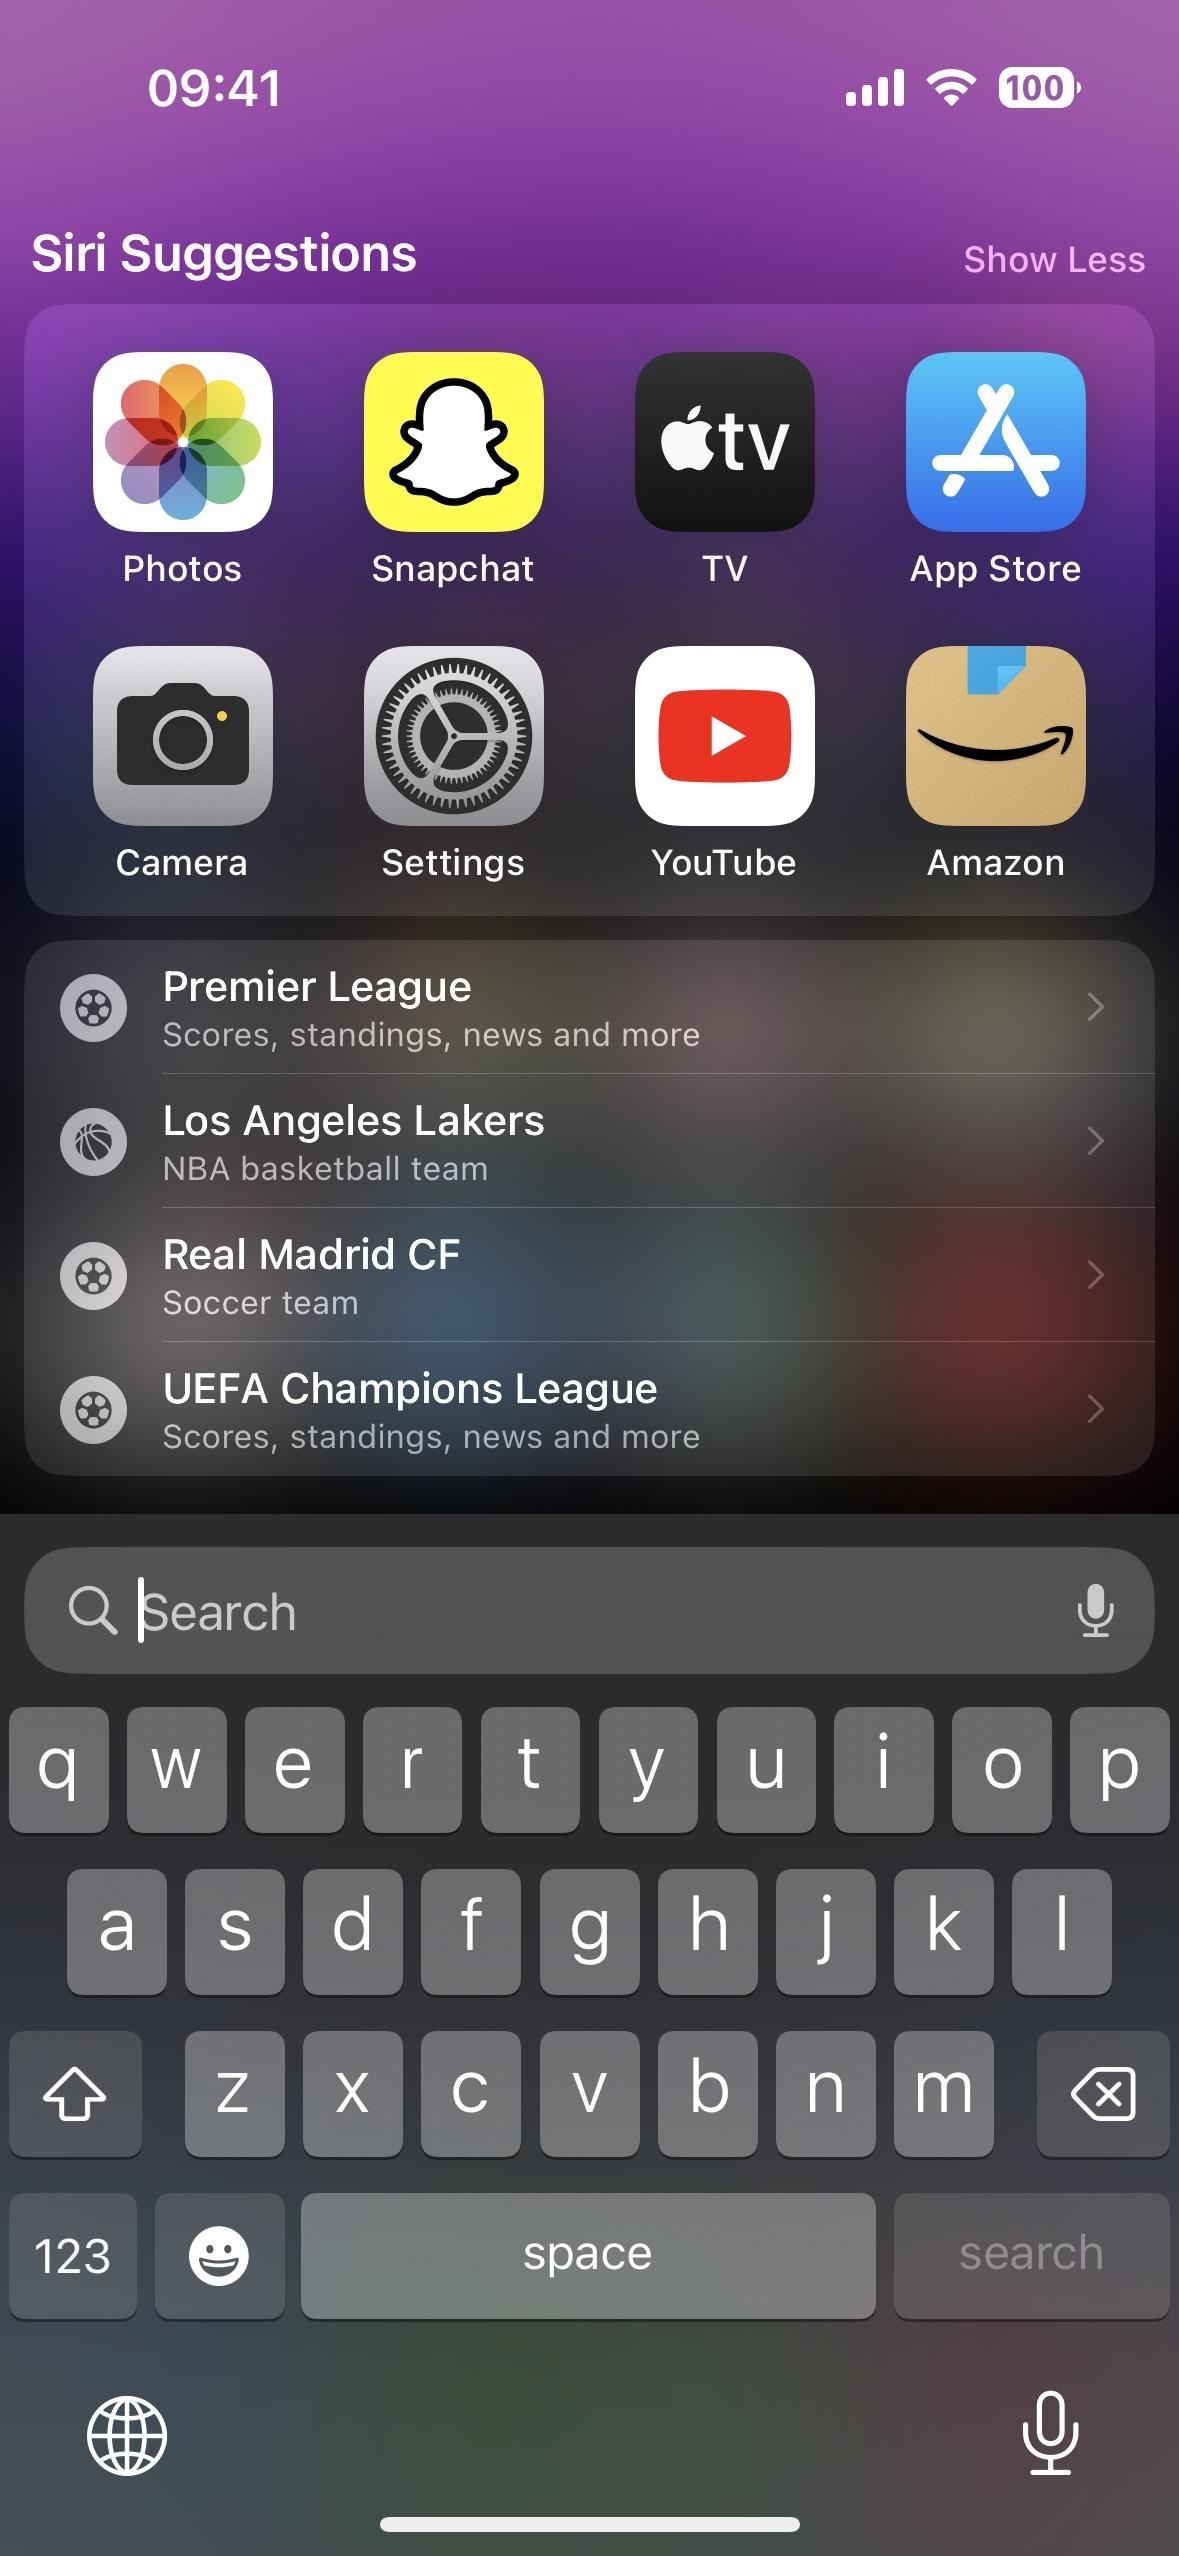 Spotlight Search is now even more amazing on your iPhone with these new updates